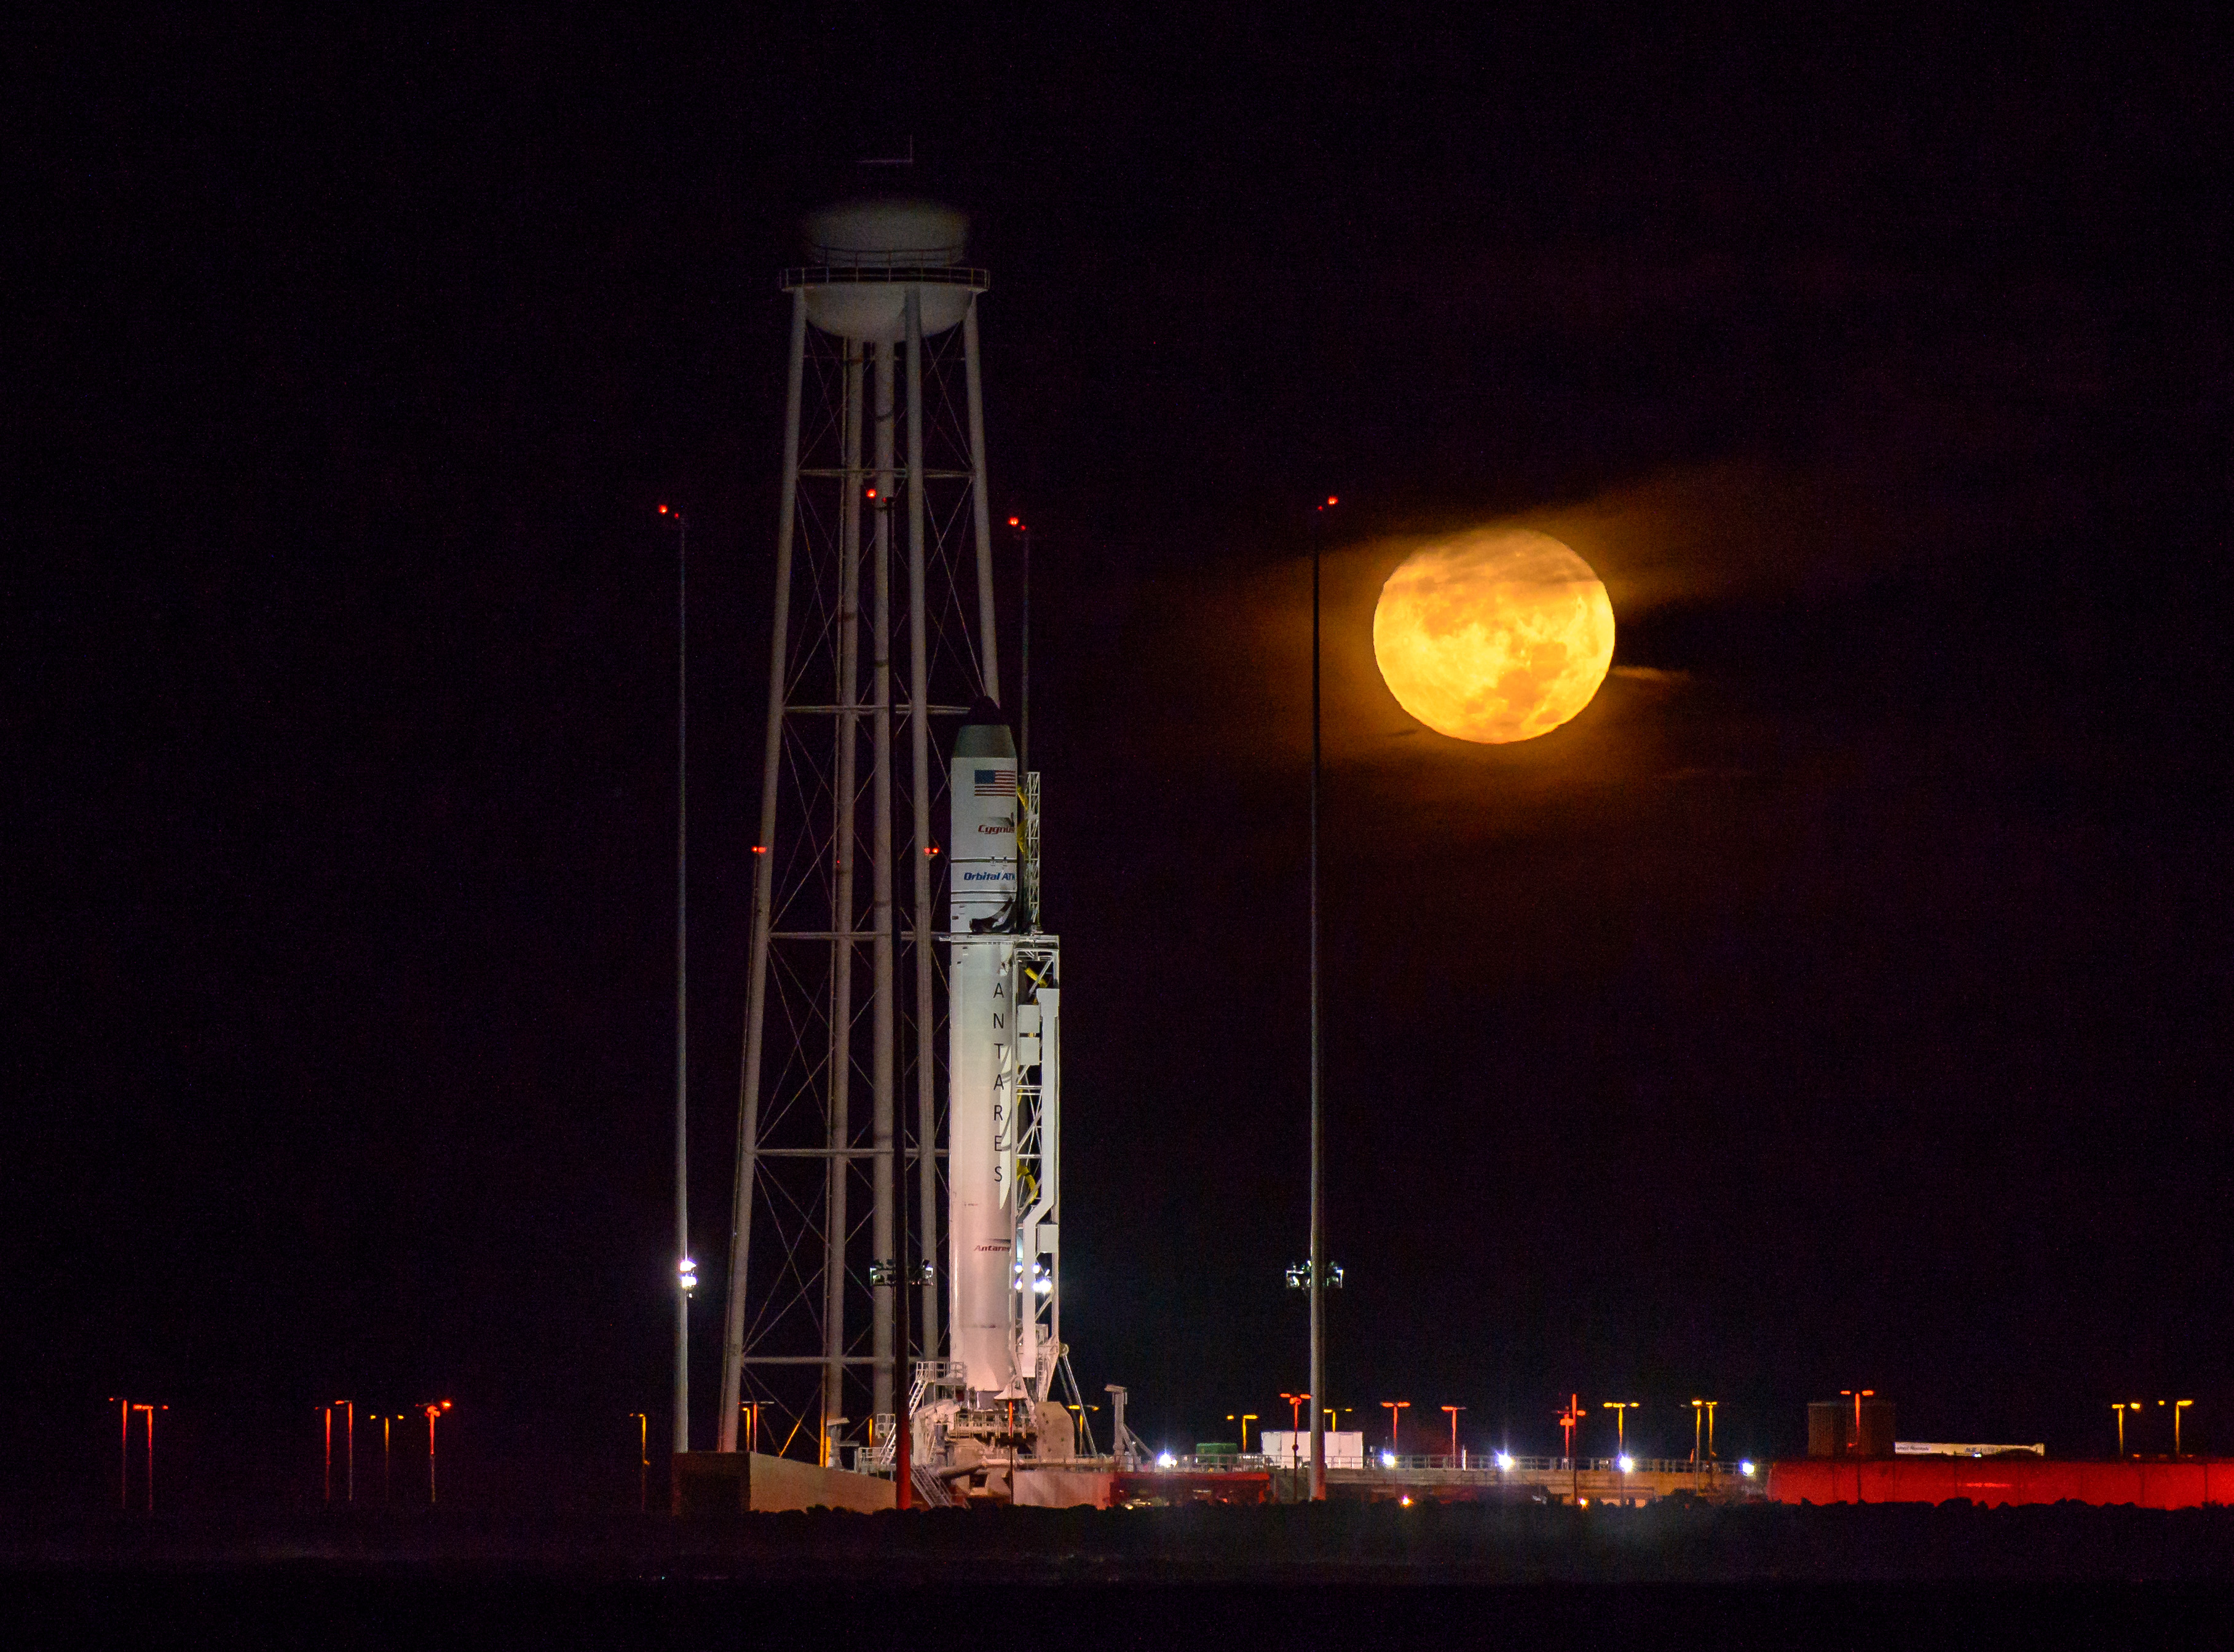 Photo Credit: Antares rocket upright in front of the full moon.